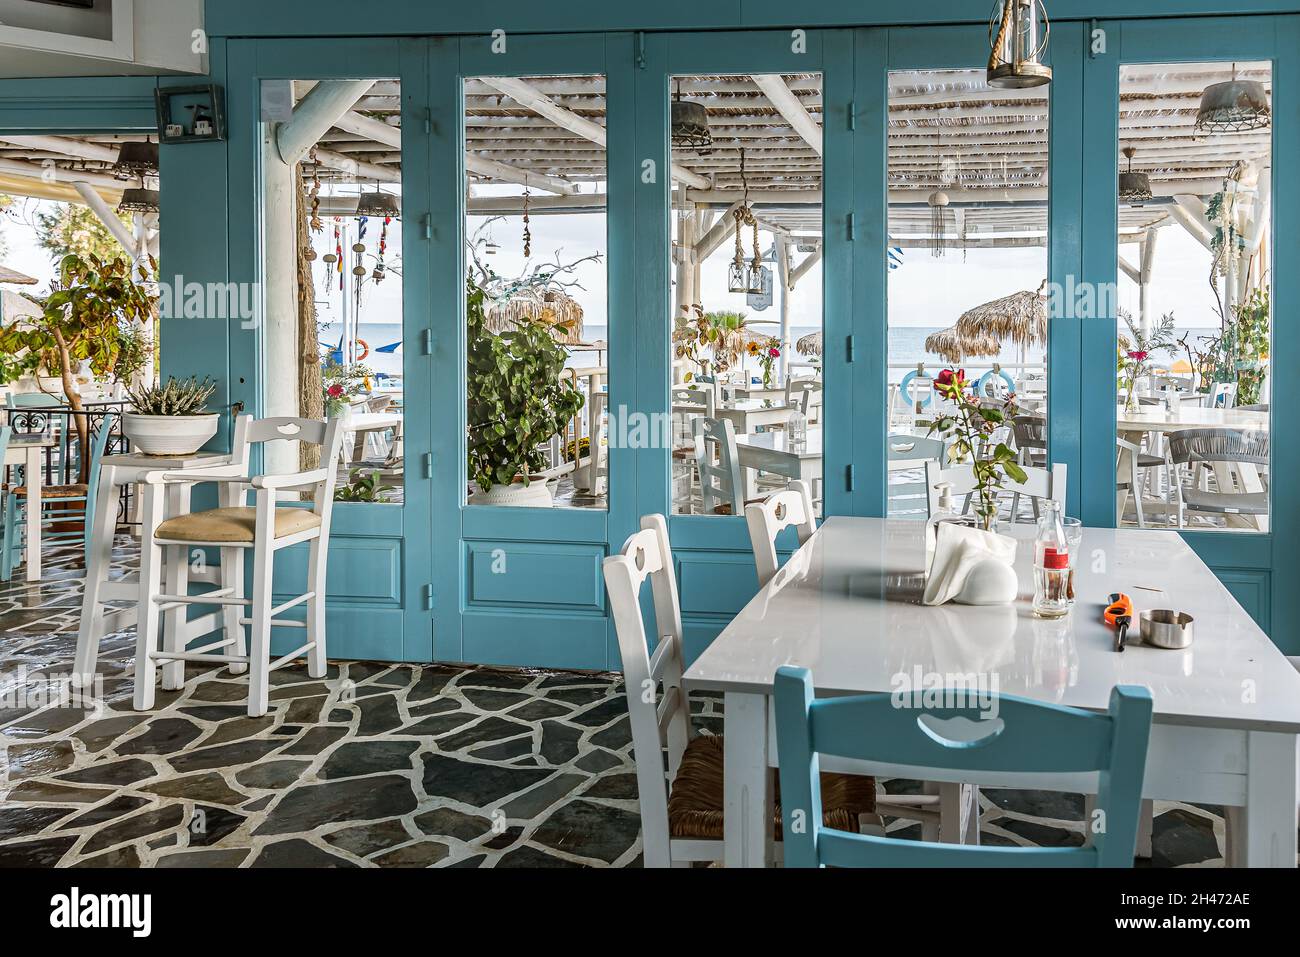 greek restaurant with blue and white tables overlooking the beach and the blue Mediterranean sea, Platanias, Crete, Greece, Oktober 7, 2021 Stock Photo